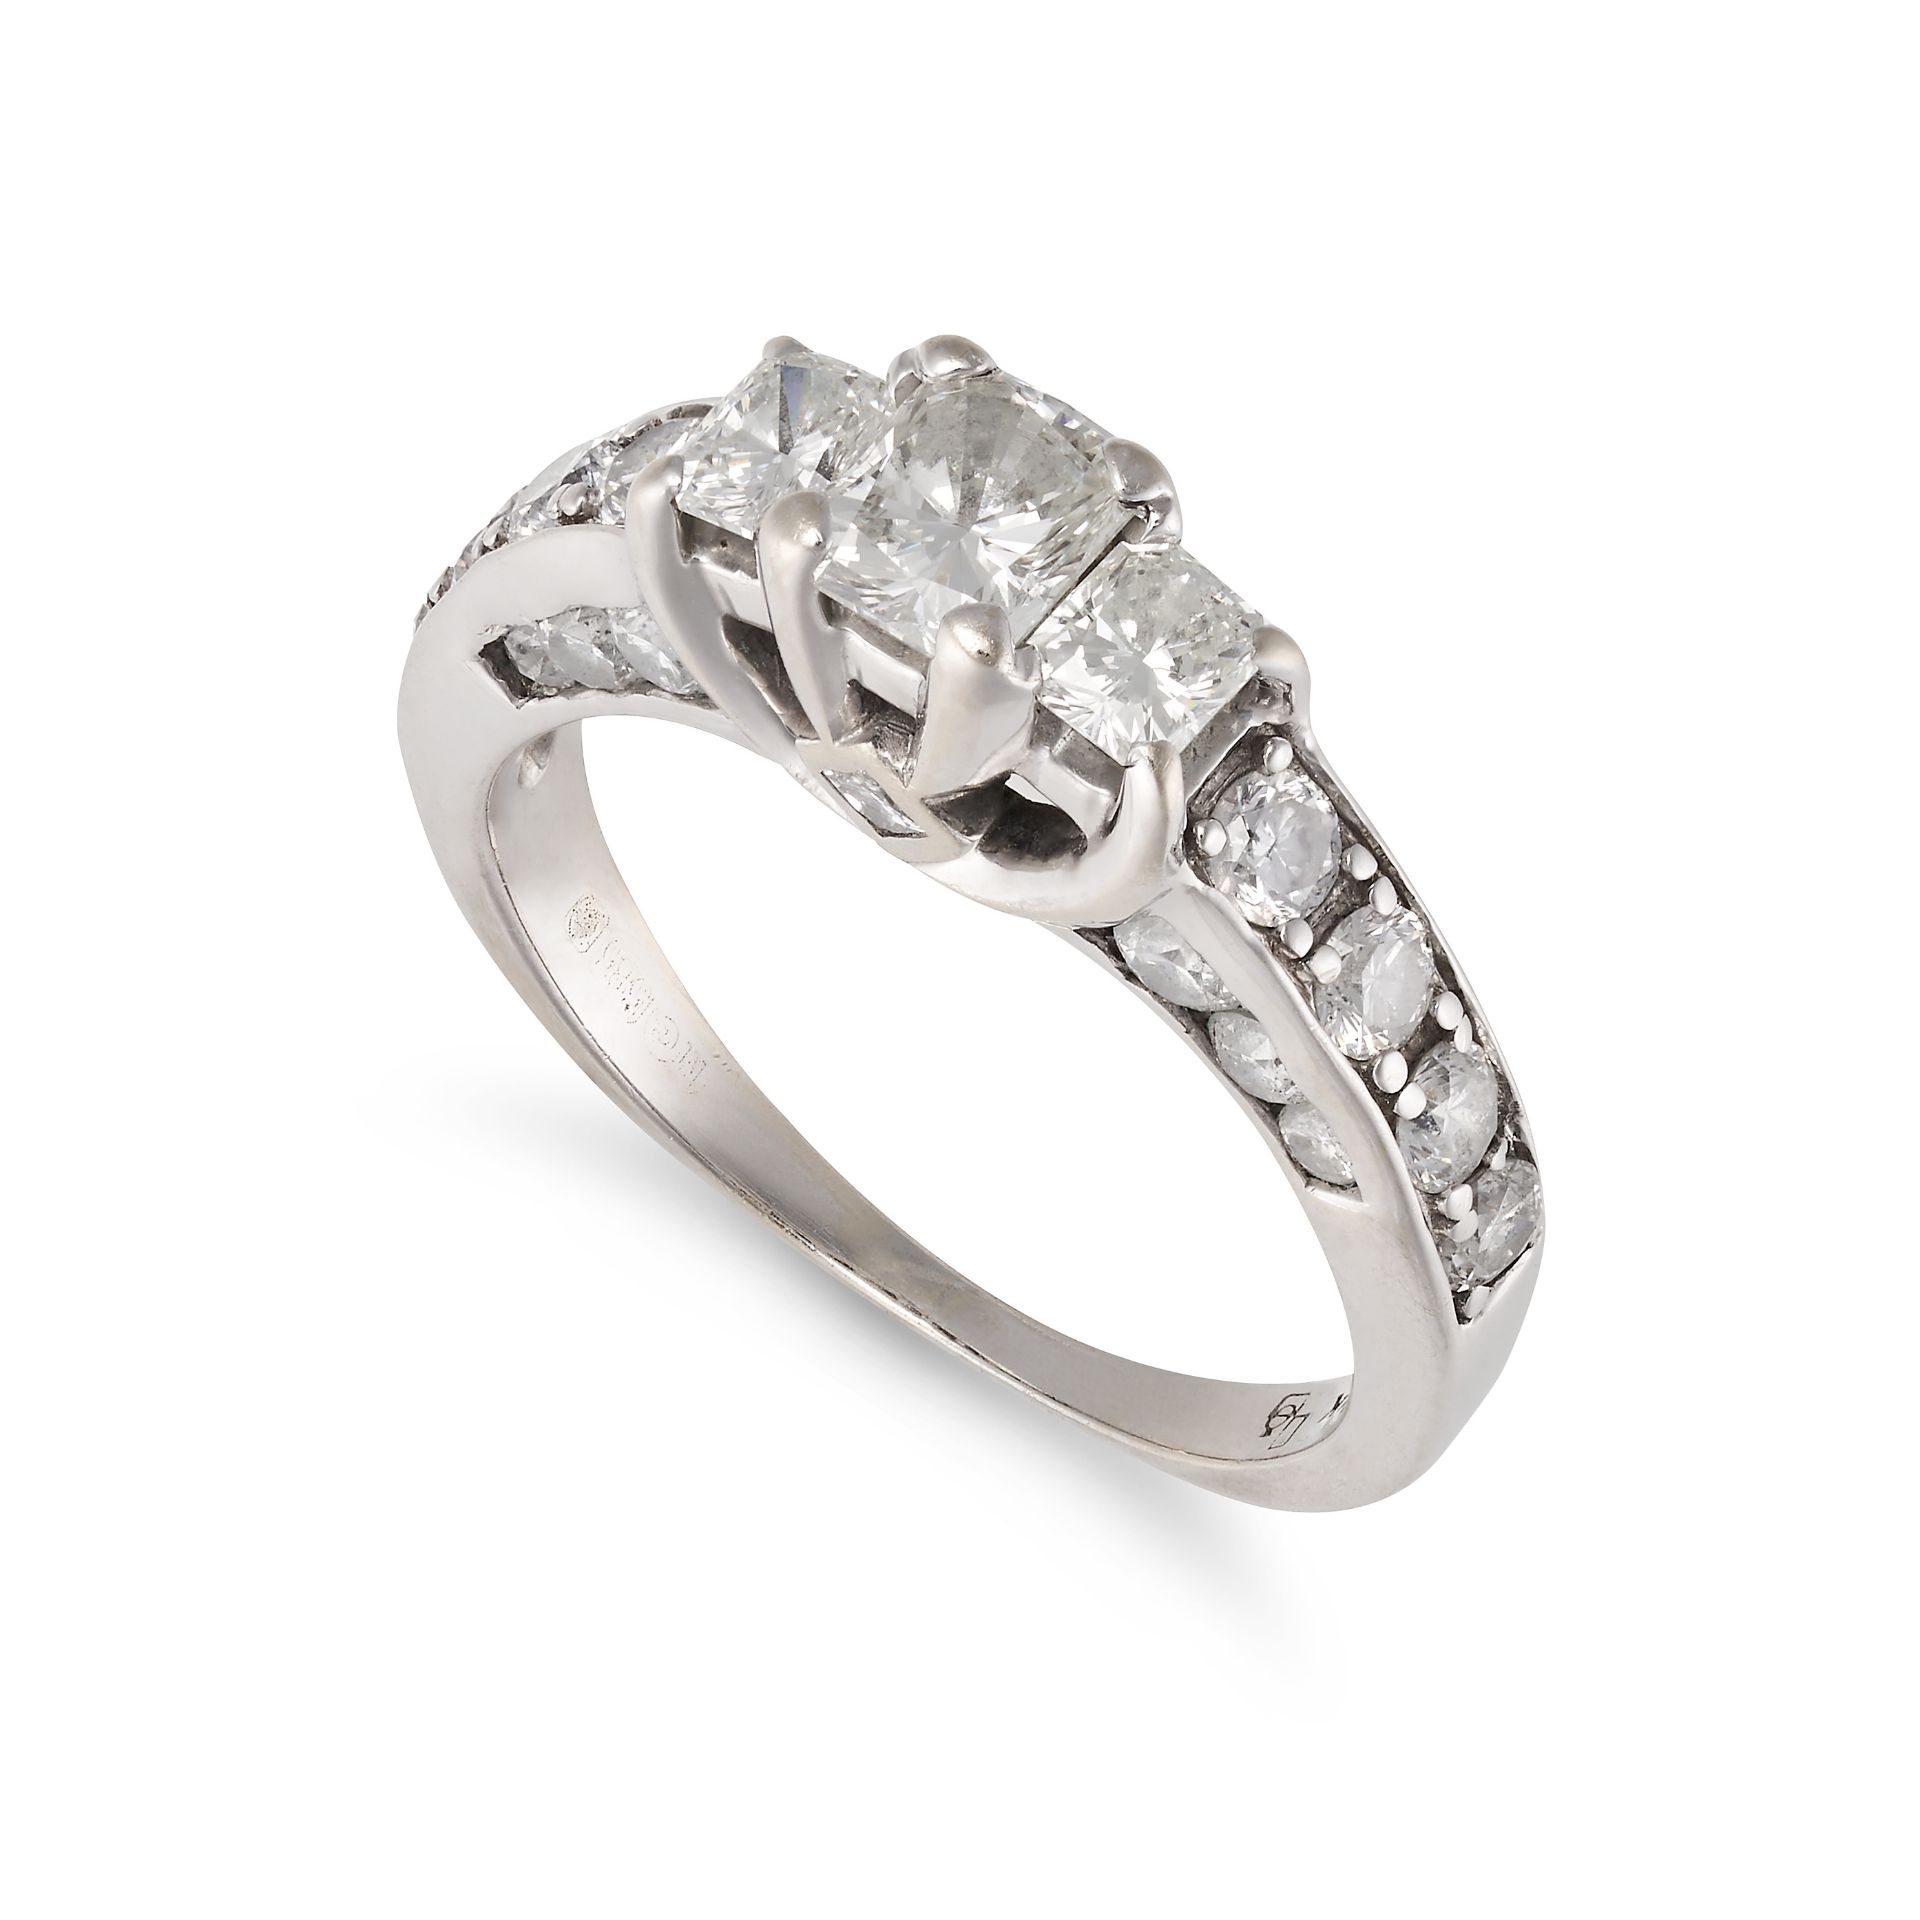 A DIAMOND RING in 14ct white gold, set with three principal radiant cut diamonds, the band and ga...